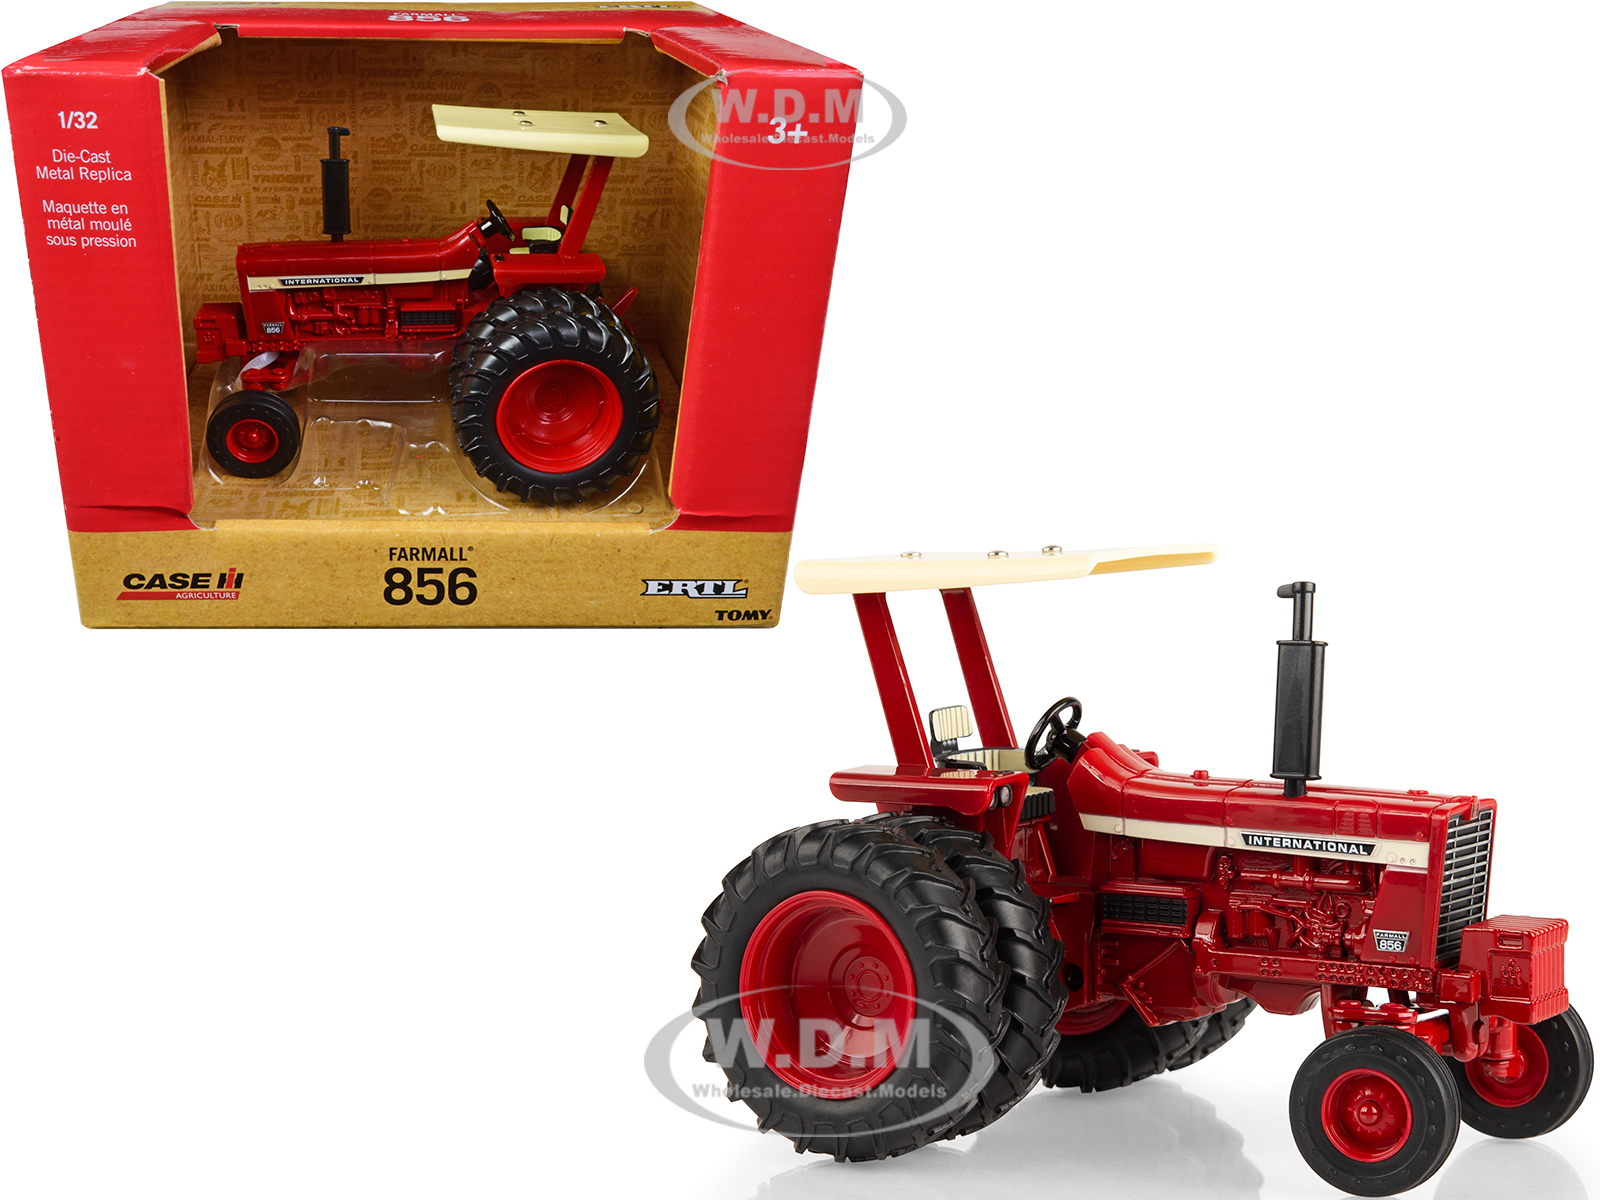 Farmall 856 Tractor with Canopy Red with Dual Wheels "Case IH Agriculture" Series 1/32 Diecast Model by ERTL TOMY